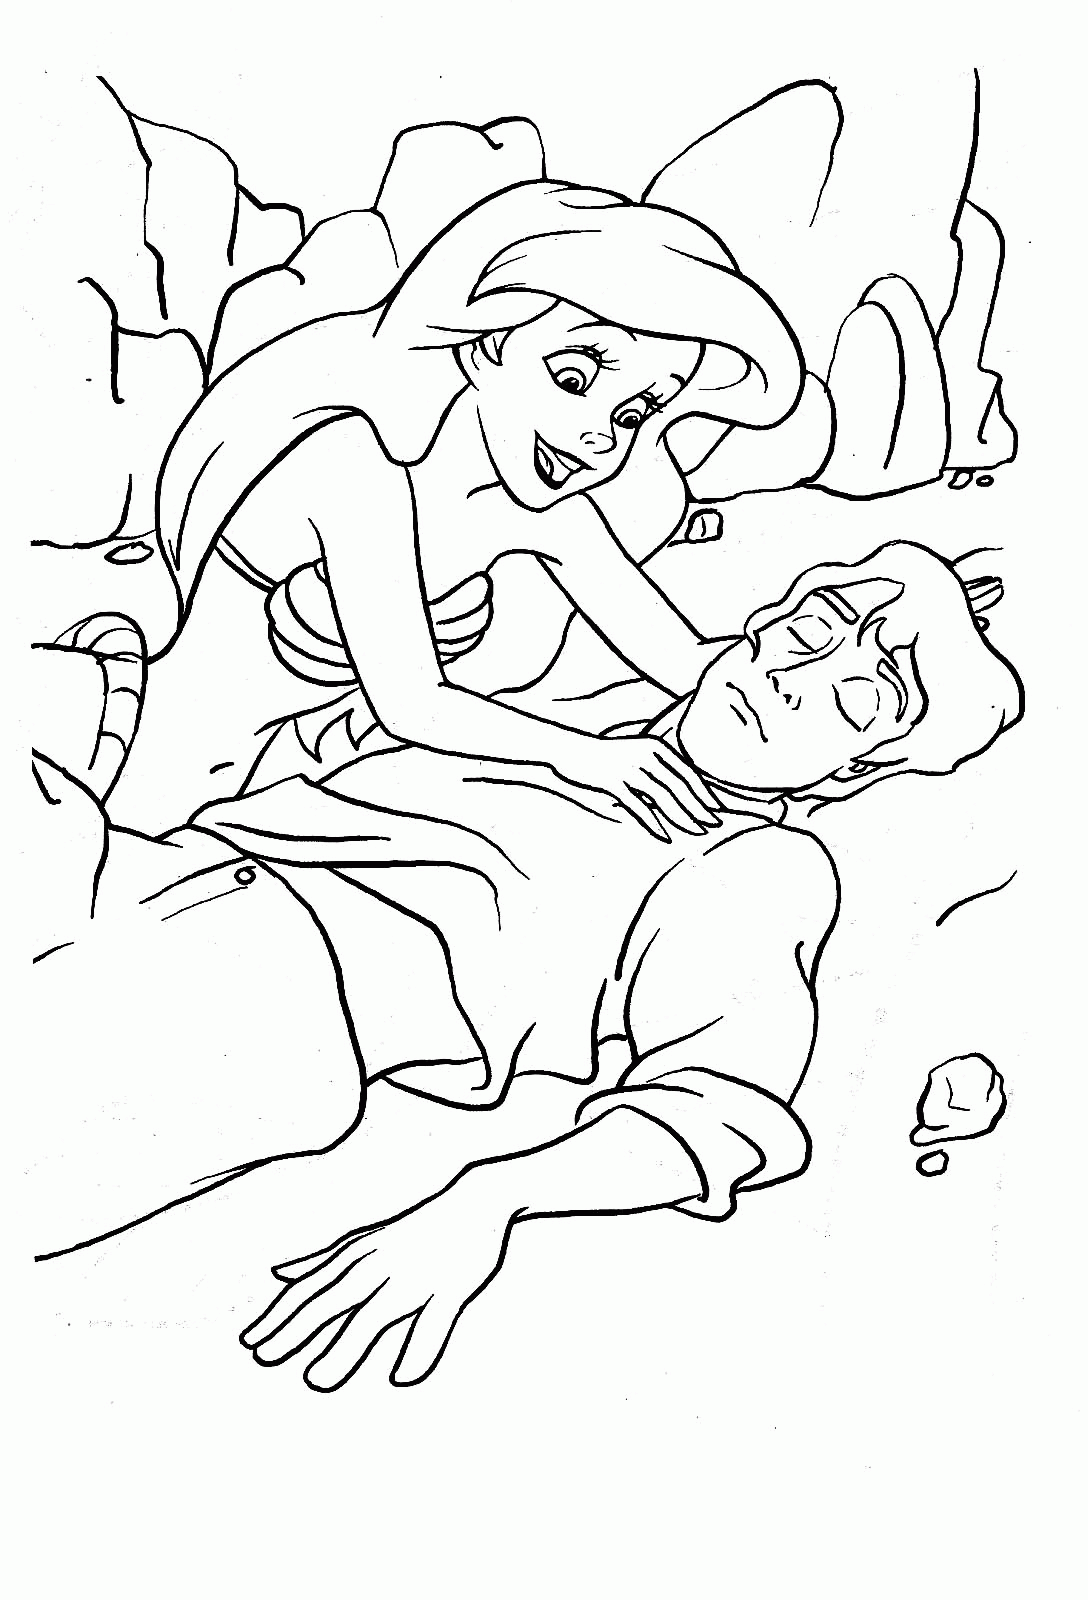 Printable Little Mermaid Coloring Pages | Coloring Me